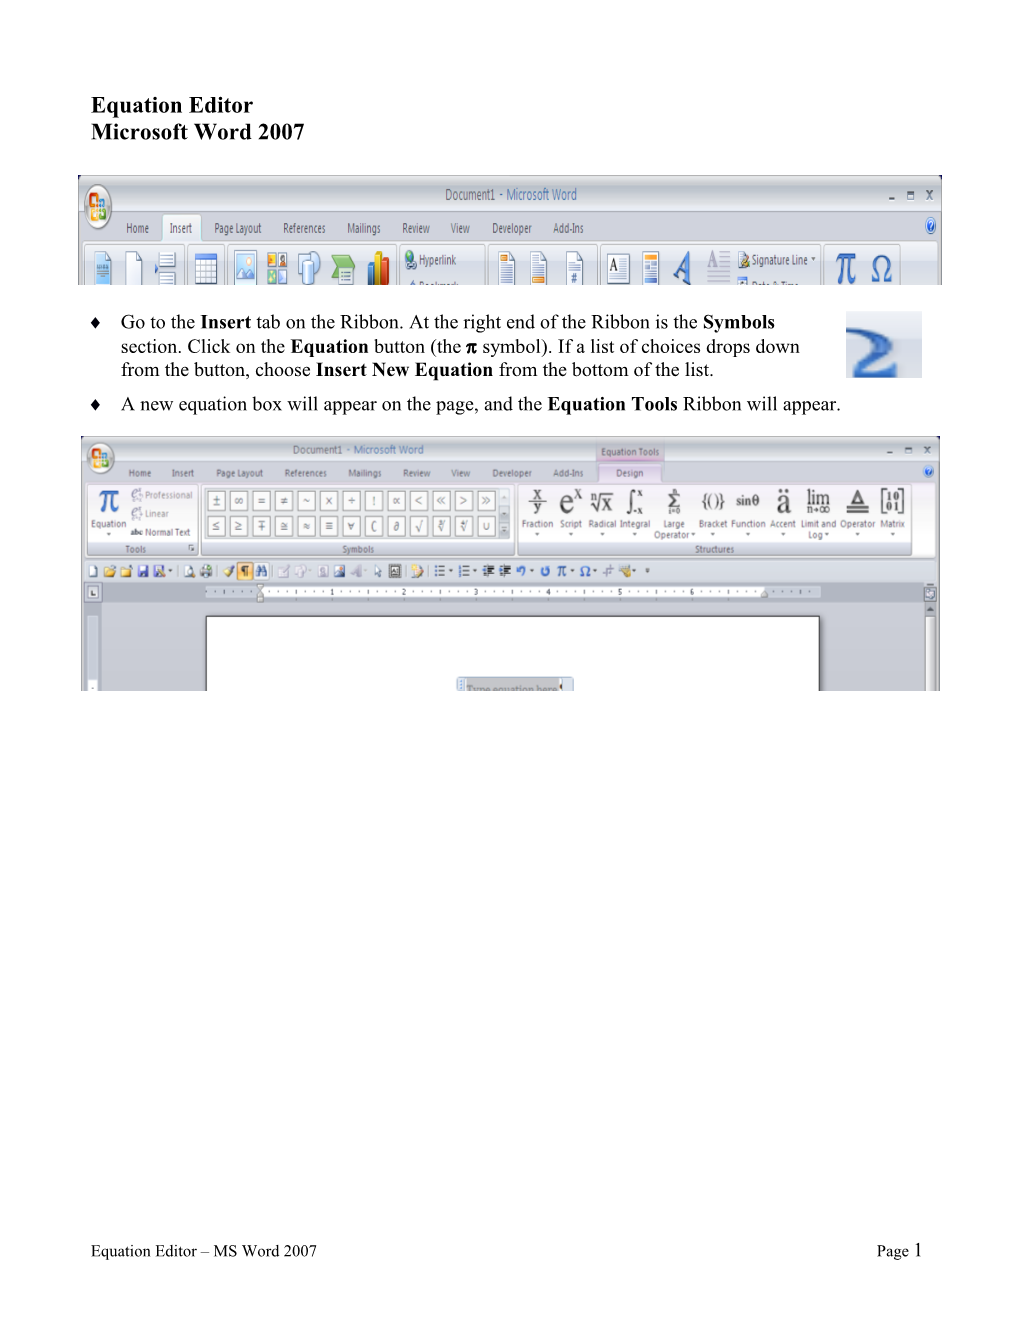 To Add Equation Editor to Word Toolbars